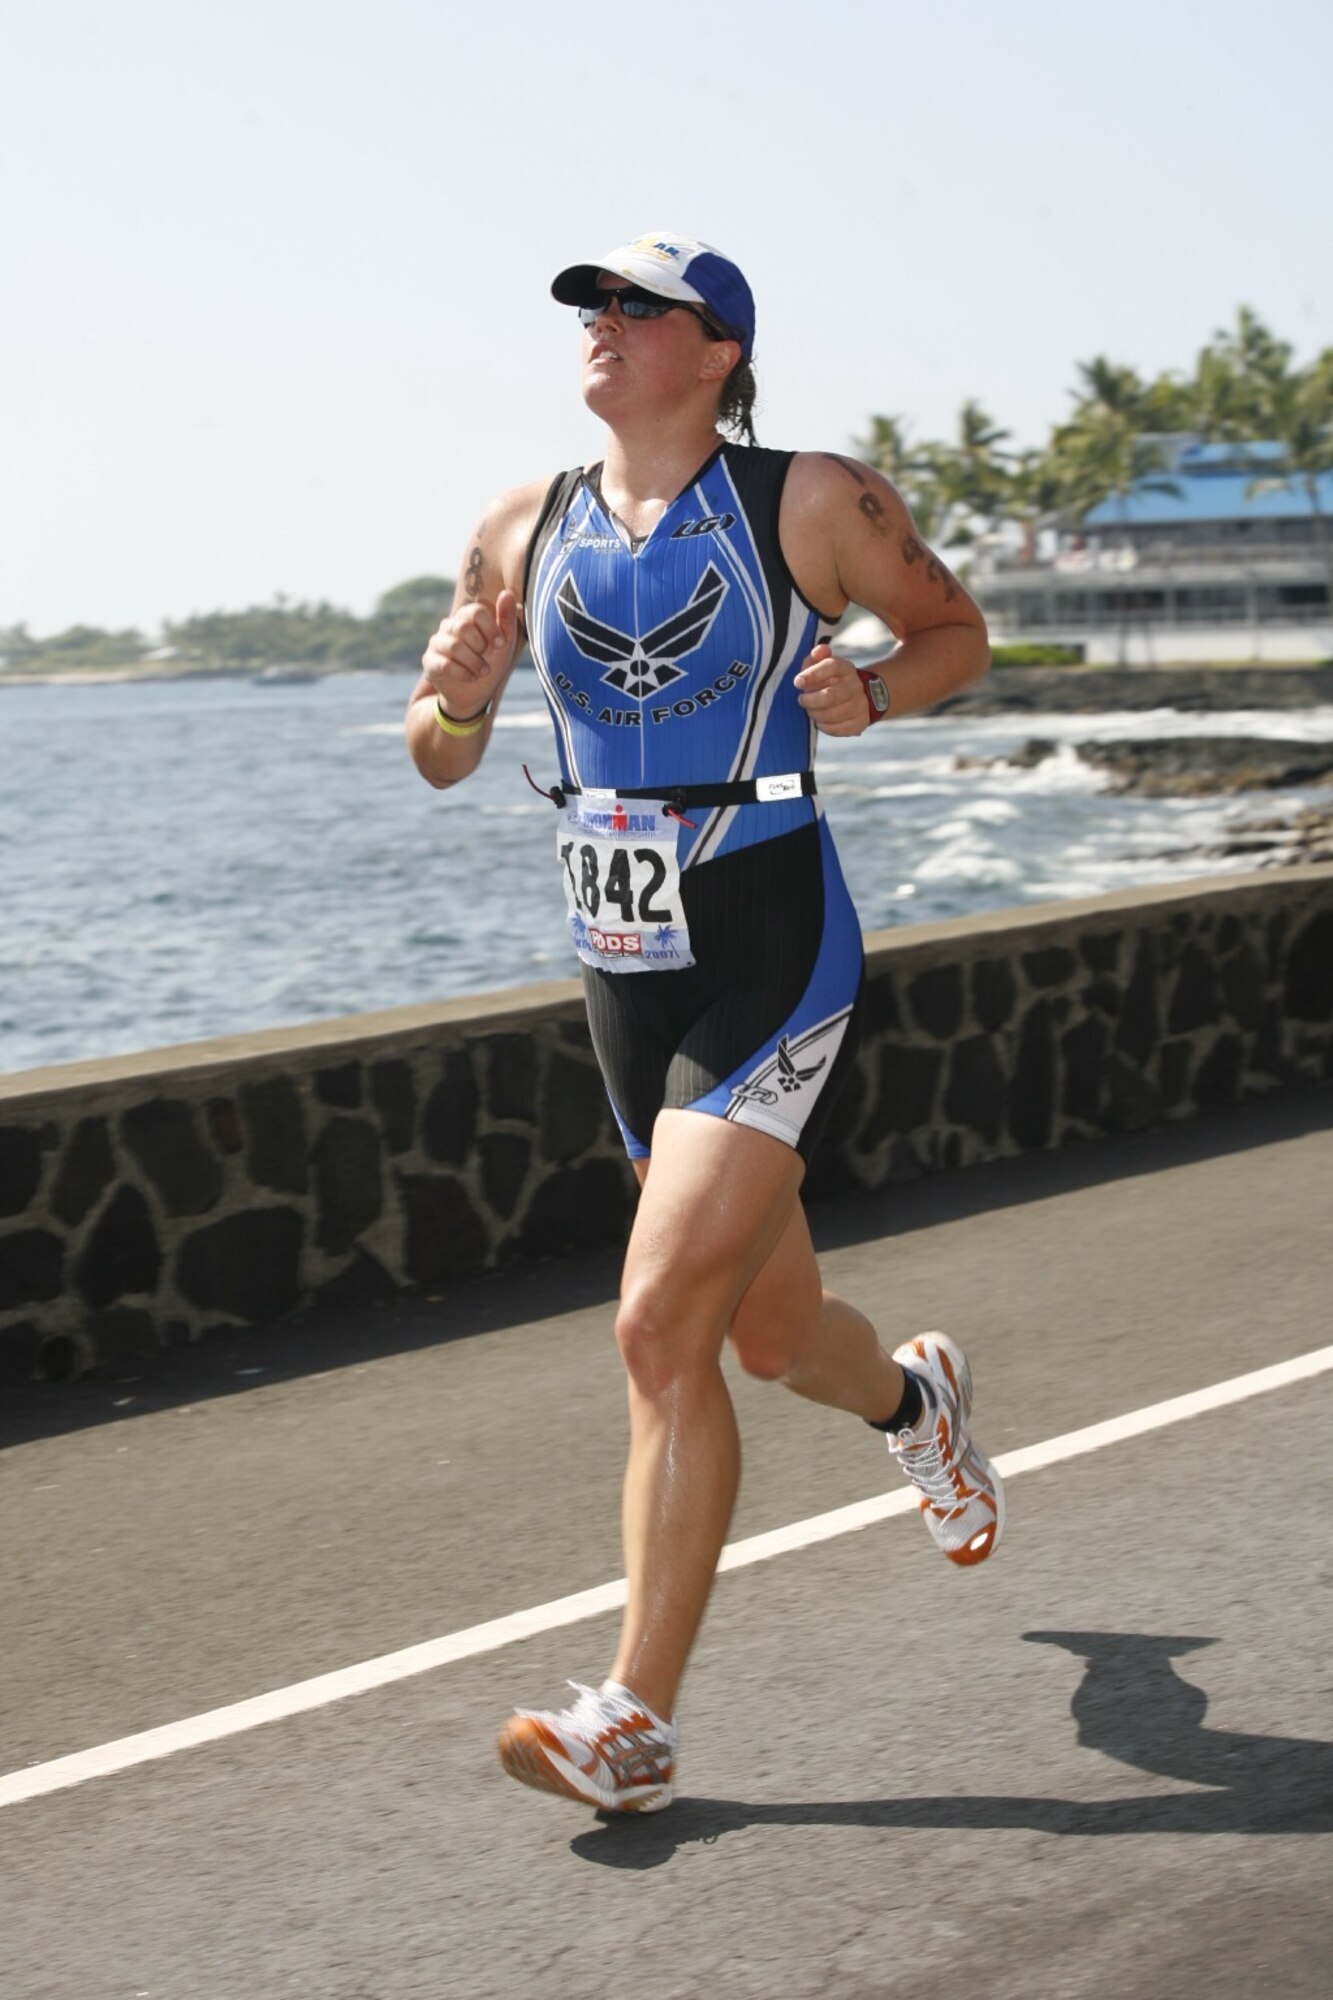 First Lt. Lisa Newman-Wise takes on the road as she battles her way to completing the Ford Ironman World Championship Triathlon held in Kailua Kona, Hawaii, Oct. 13. Lieutenant Newman-Wise was selected by the Air Force to compete with three other Airmen in the triathlon. (Courtesy photo)